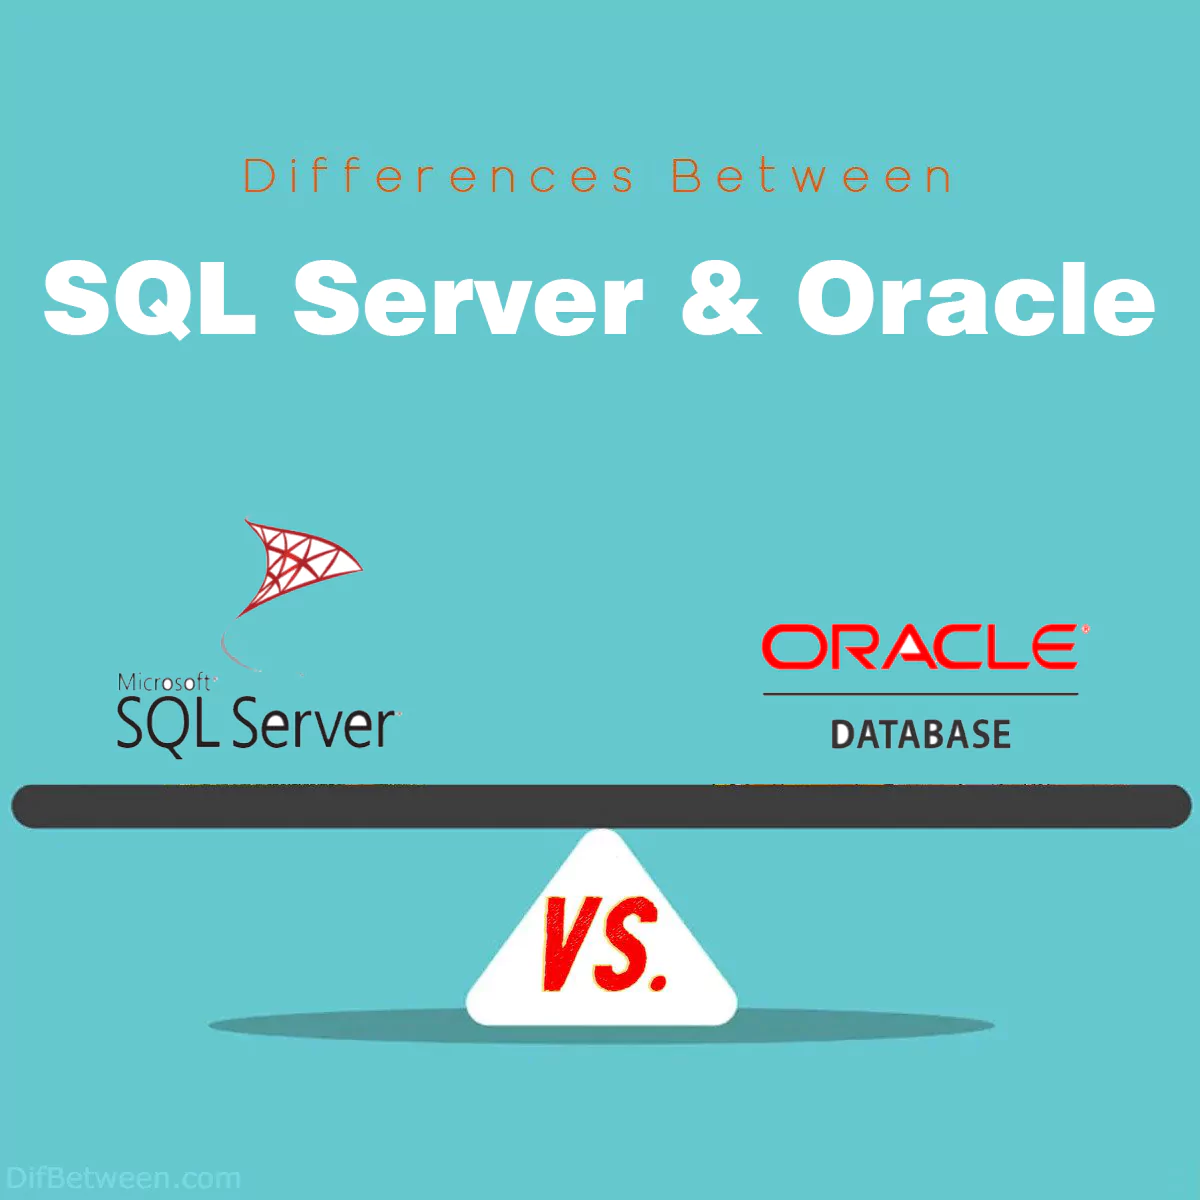 Differences Between SQL Server and Oracle